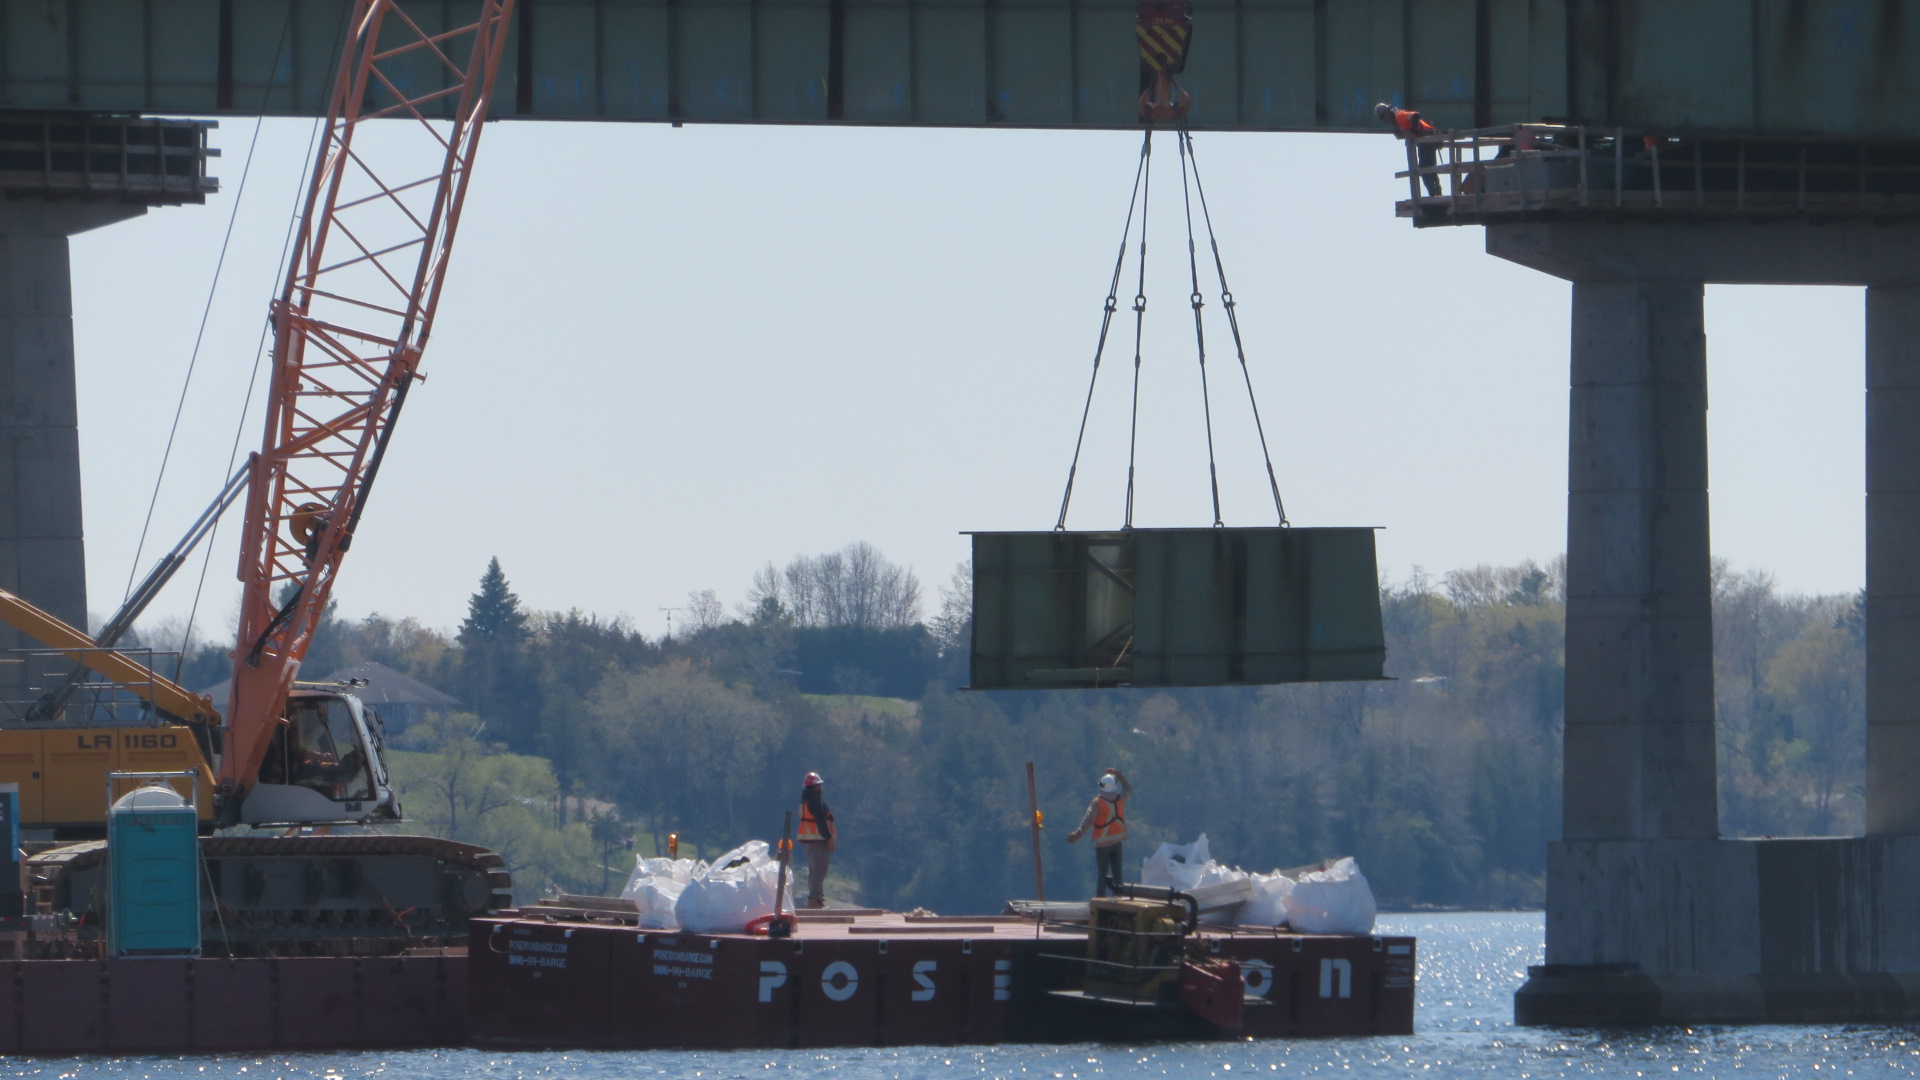 Lowering the girder section to the barge